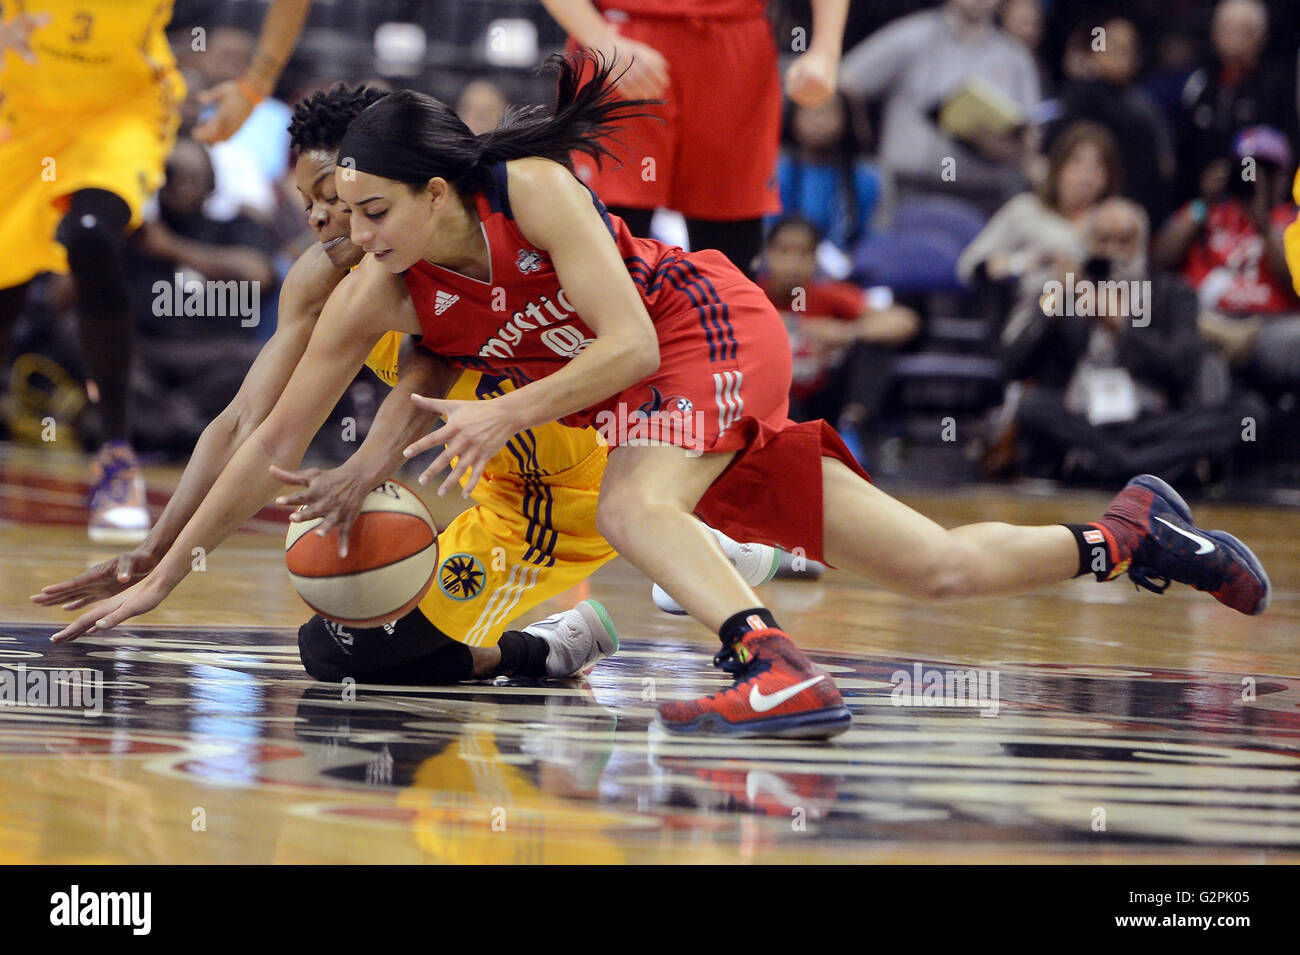 Washington, DC, USA. 20th May, 2016. 20160520 - Los Angeles Sparks guard ALANA BEARD (0) and Washington Mystics guard BRIA HARTLEY (8) dive after a loose ball on the floor in the first half at the Verizon Center in Washington. © Chuck Myers/ZUMA Wire/Alamy Live News Stock Photo